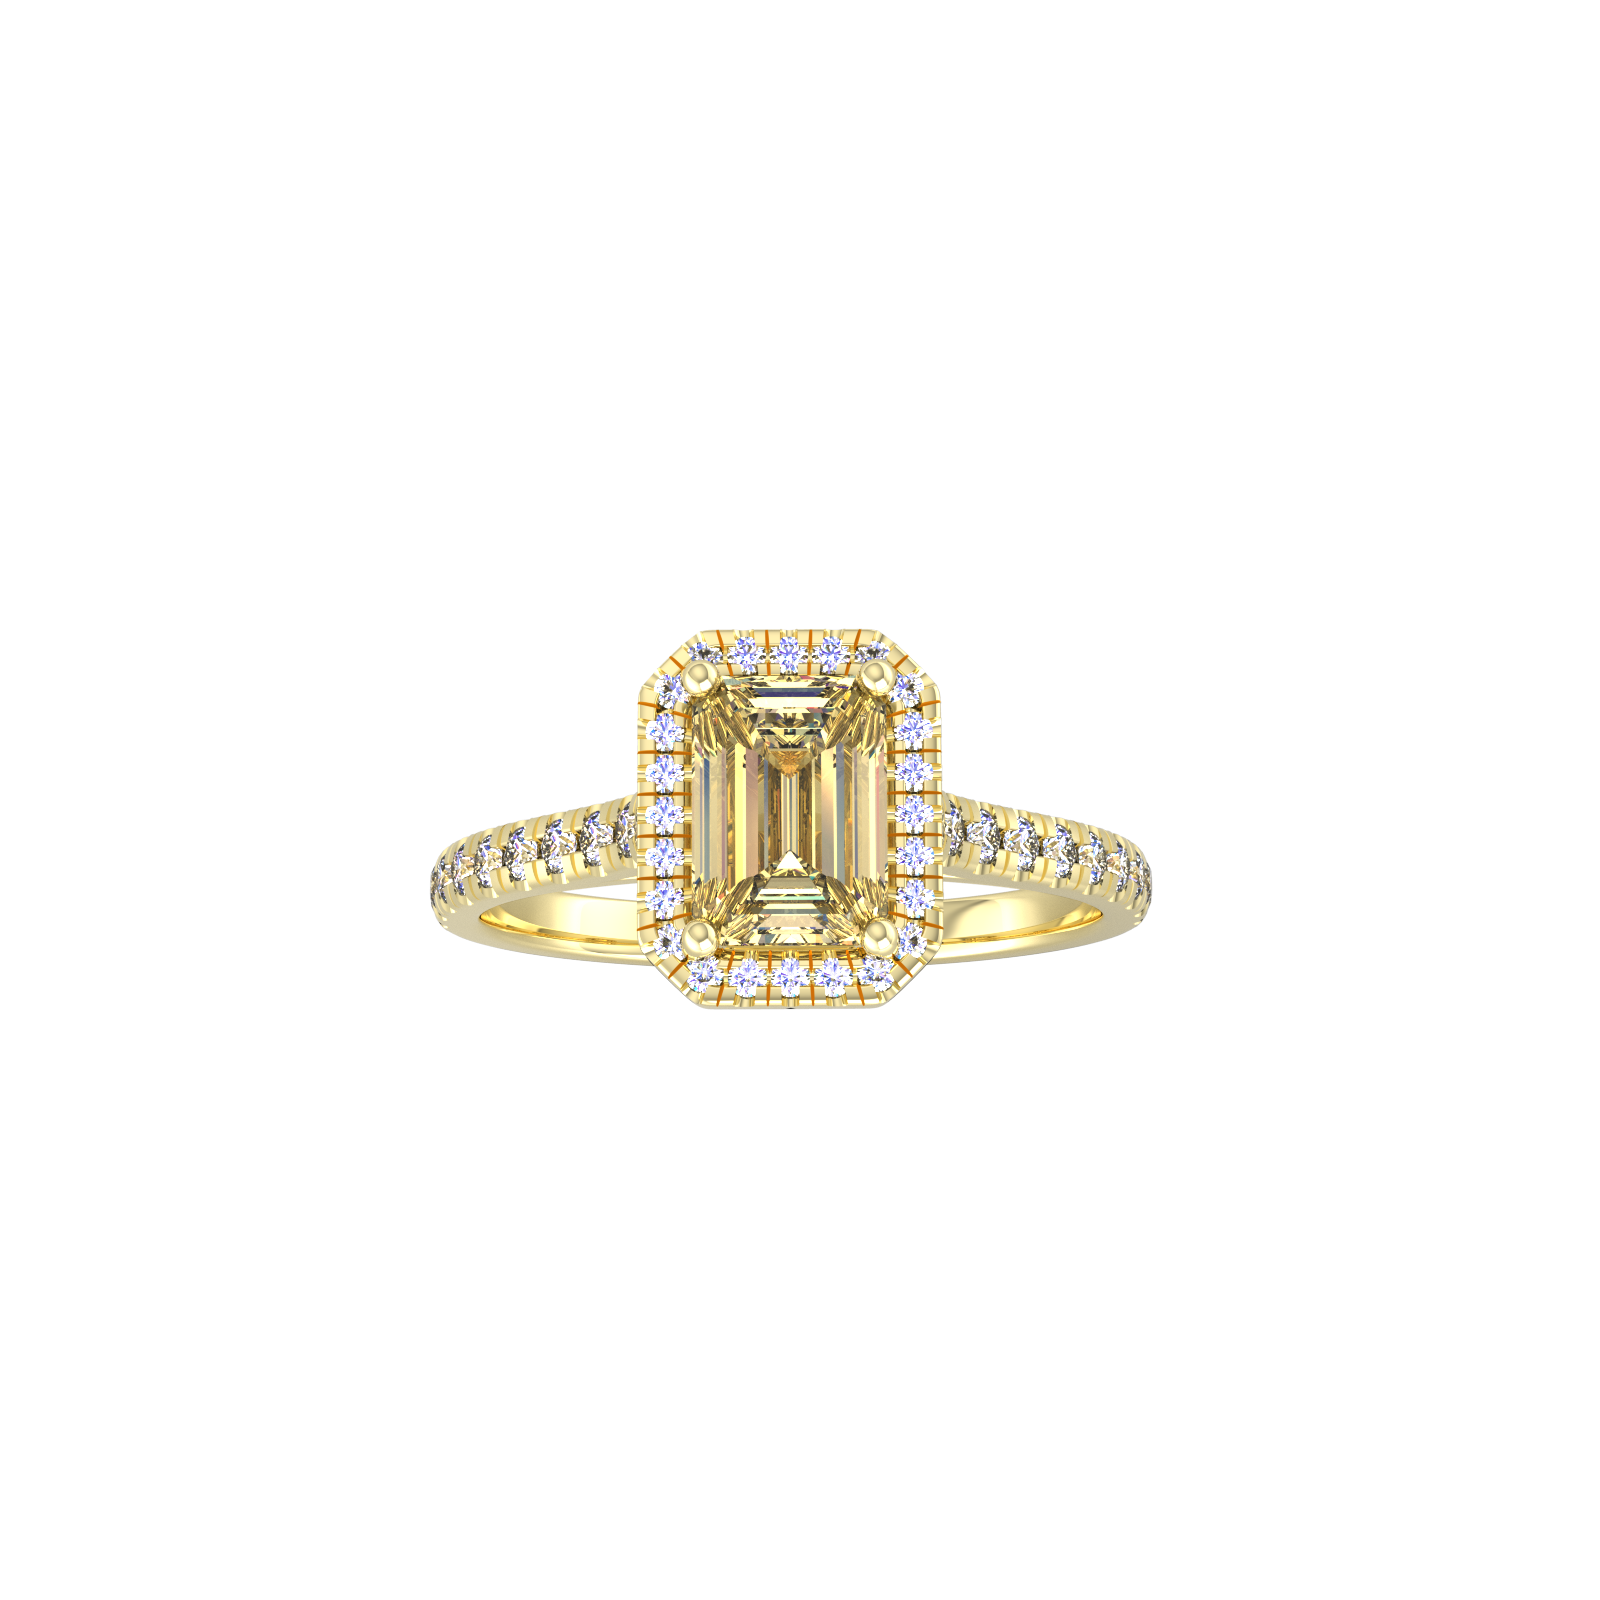 9ct Yellow Gold Citrine & Diamond Halo Ring with Diamond Shoulders - Ring Size T